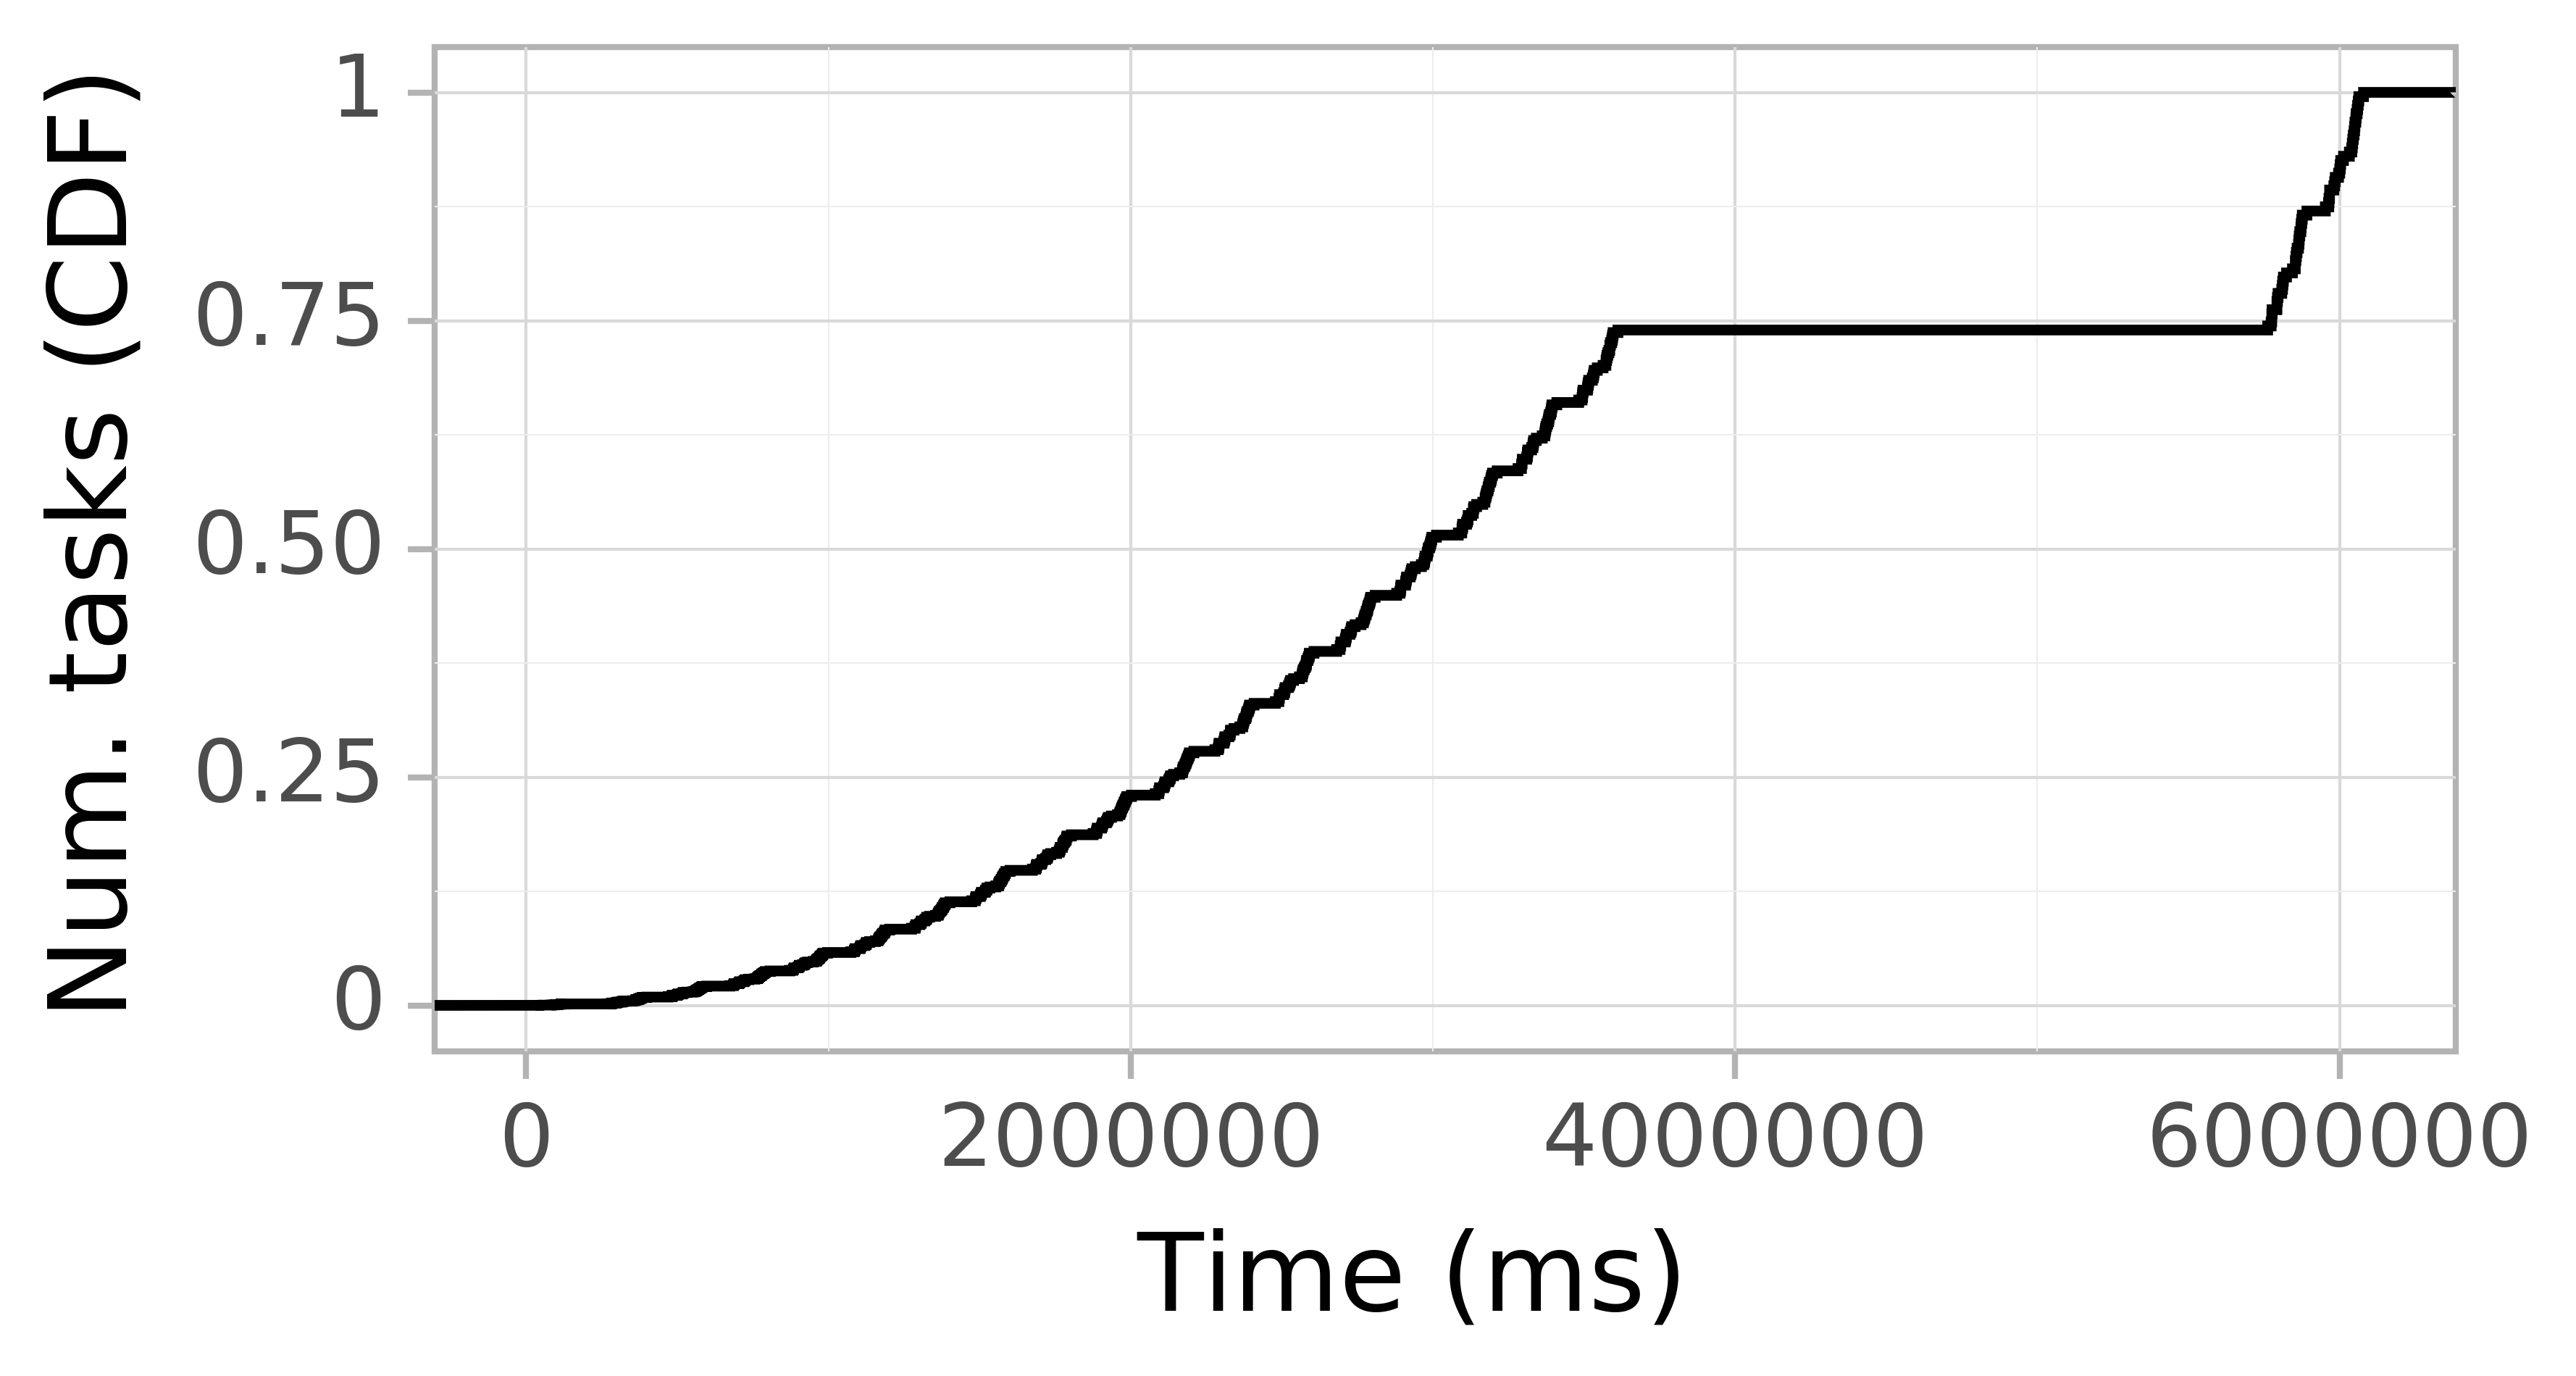 Task arrival CDF graph for the askalon-new_ee8 trace.